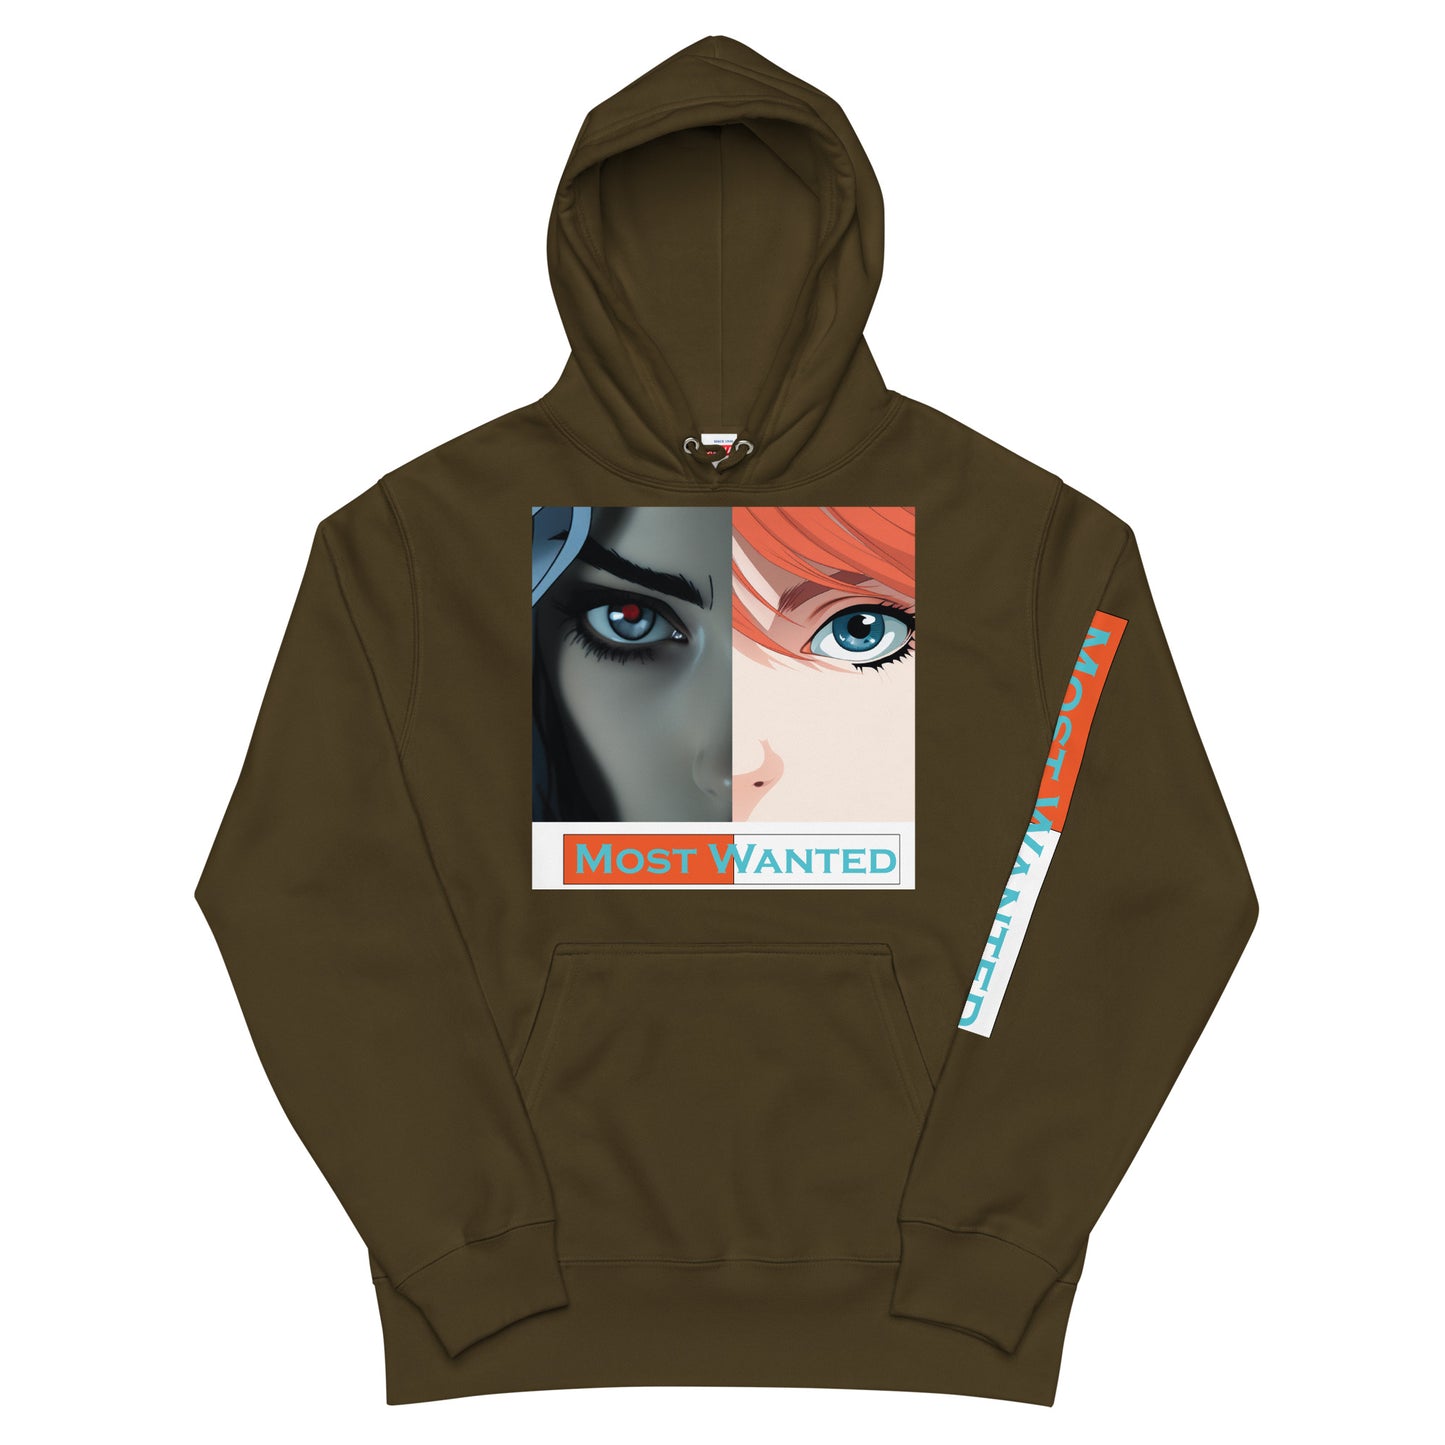 Its In the Eyes- Hoodie (Most Wanted) #1